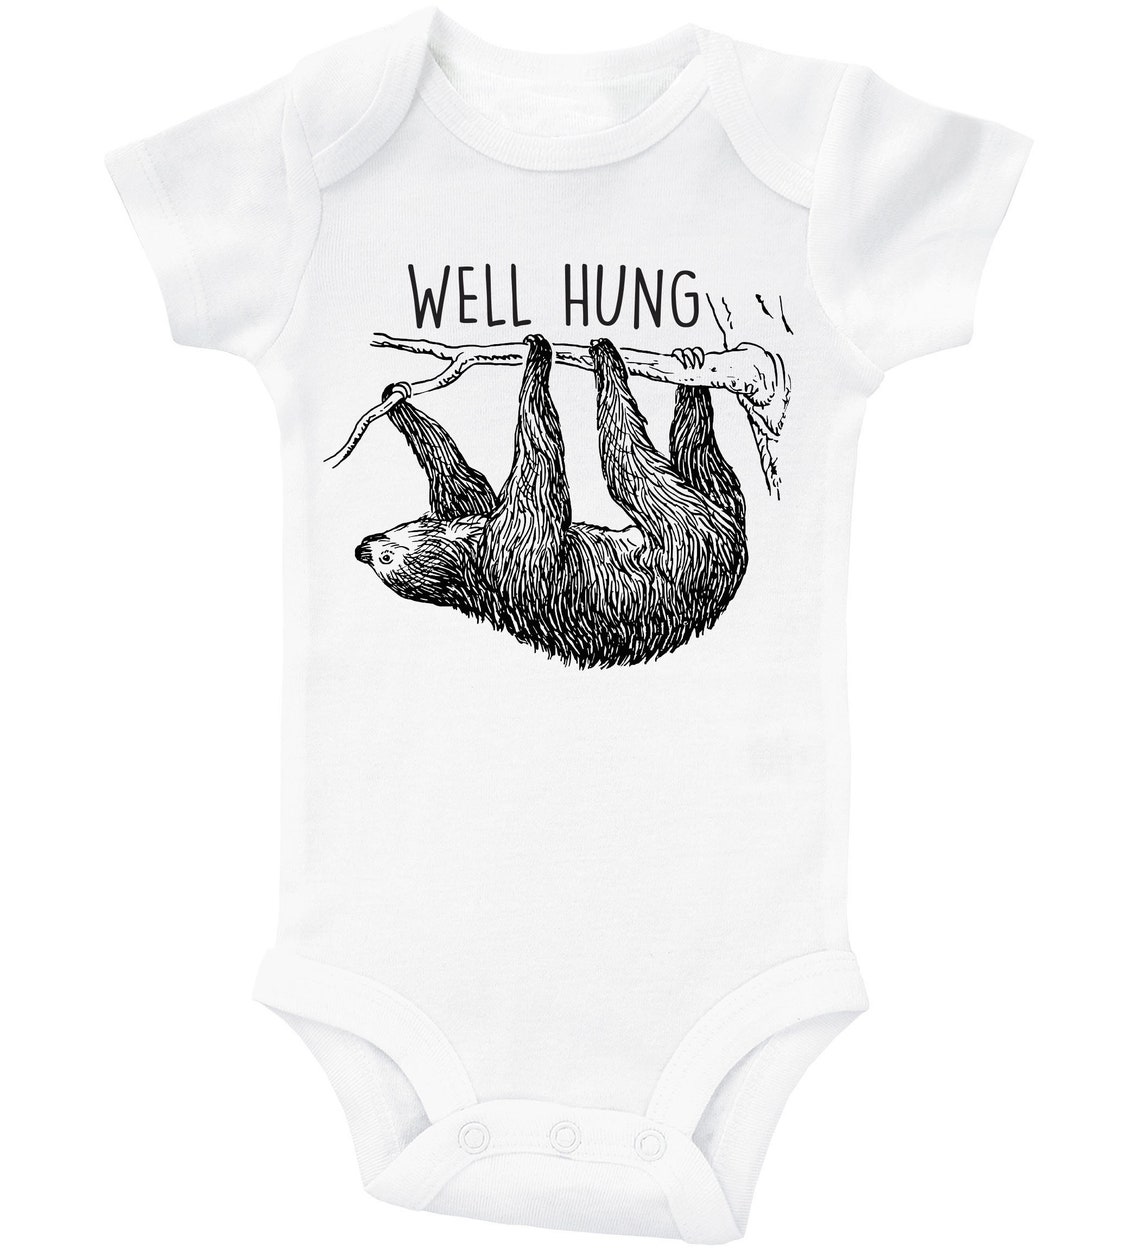 Funny Sloth Onesie WELL HUNG Baby Bodysuit Baby Shower | Etsy